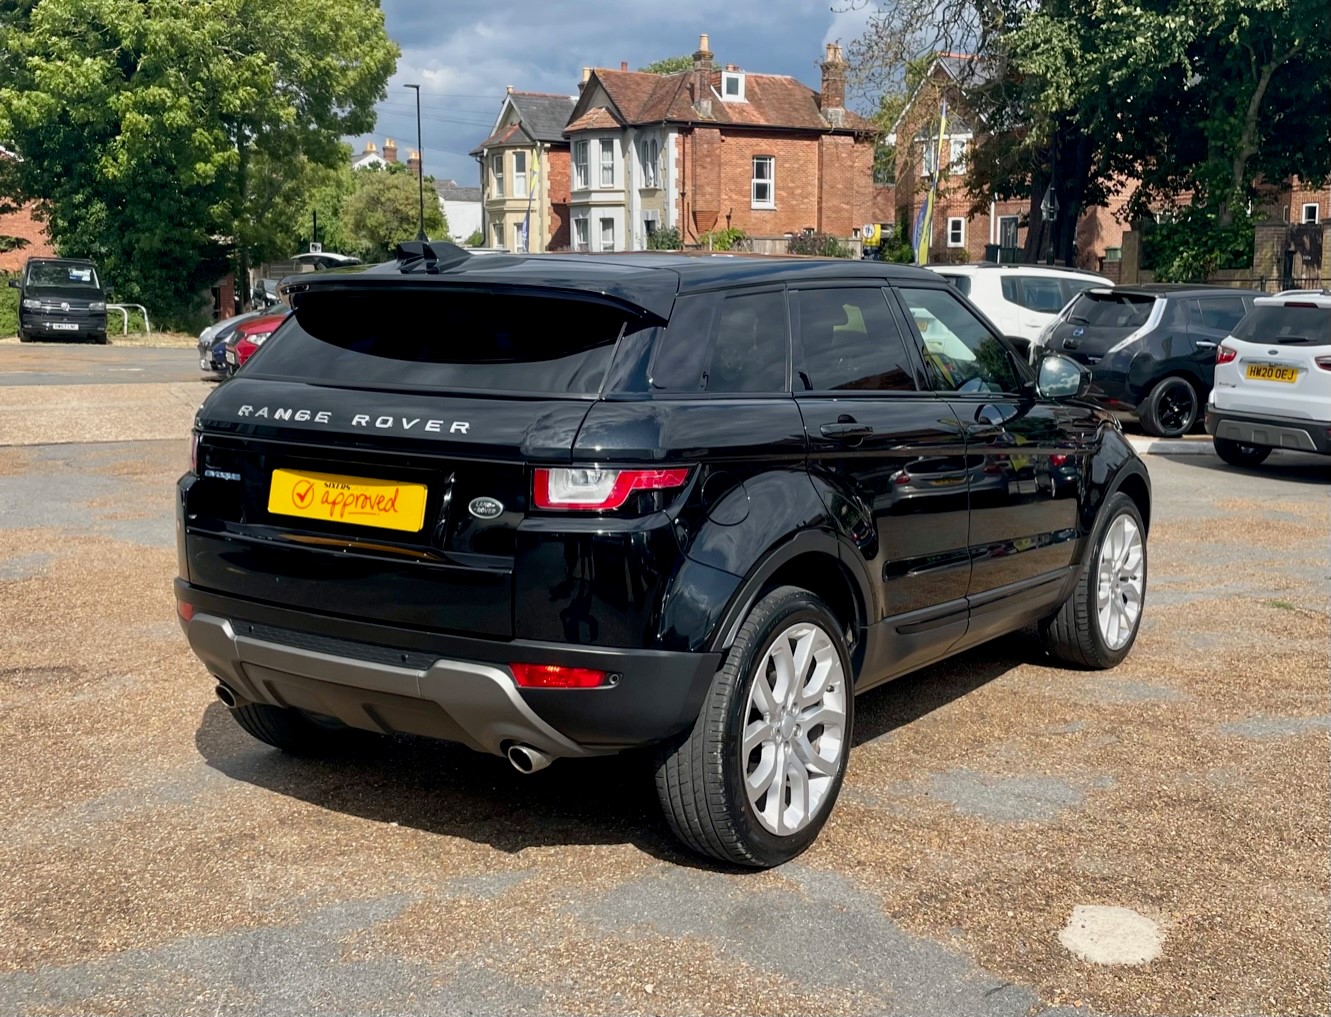 Car For Sale Land Rover Range Rover Evoque - GX66VUJ Sixers Group Image #2